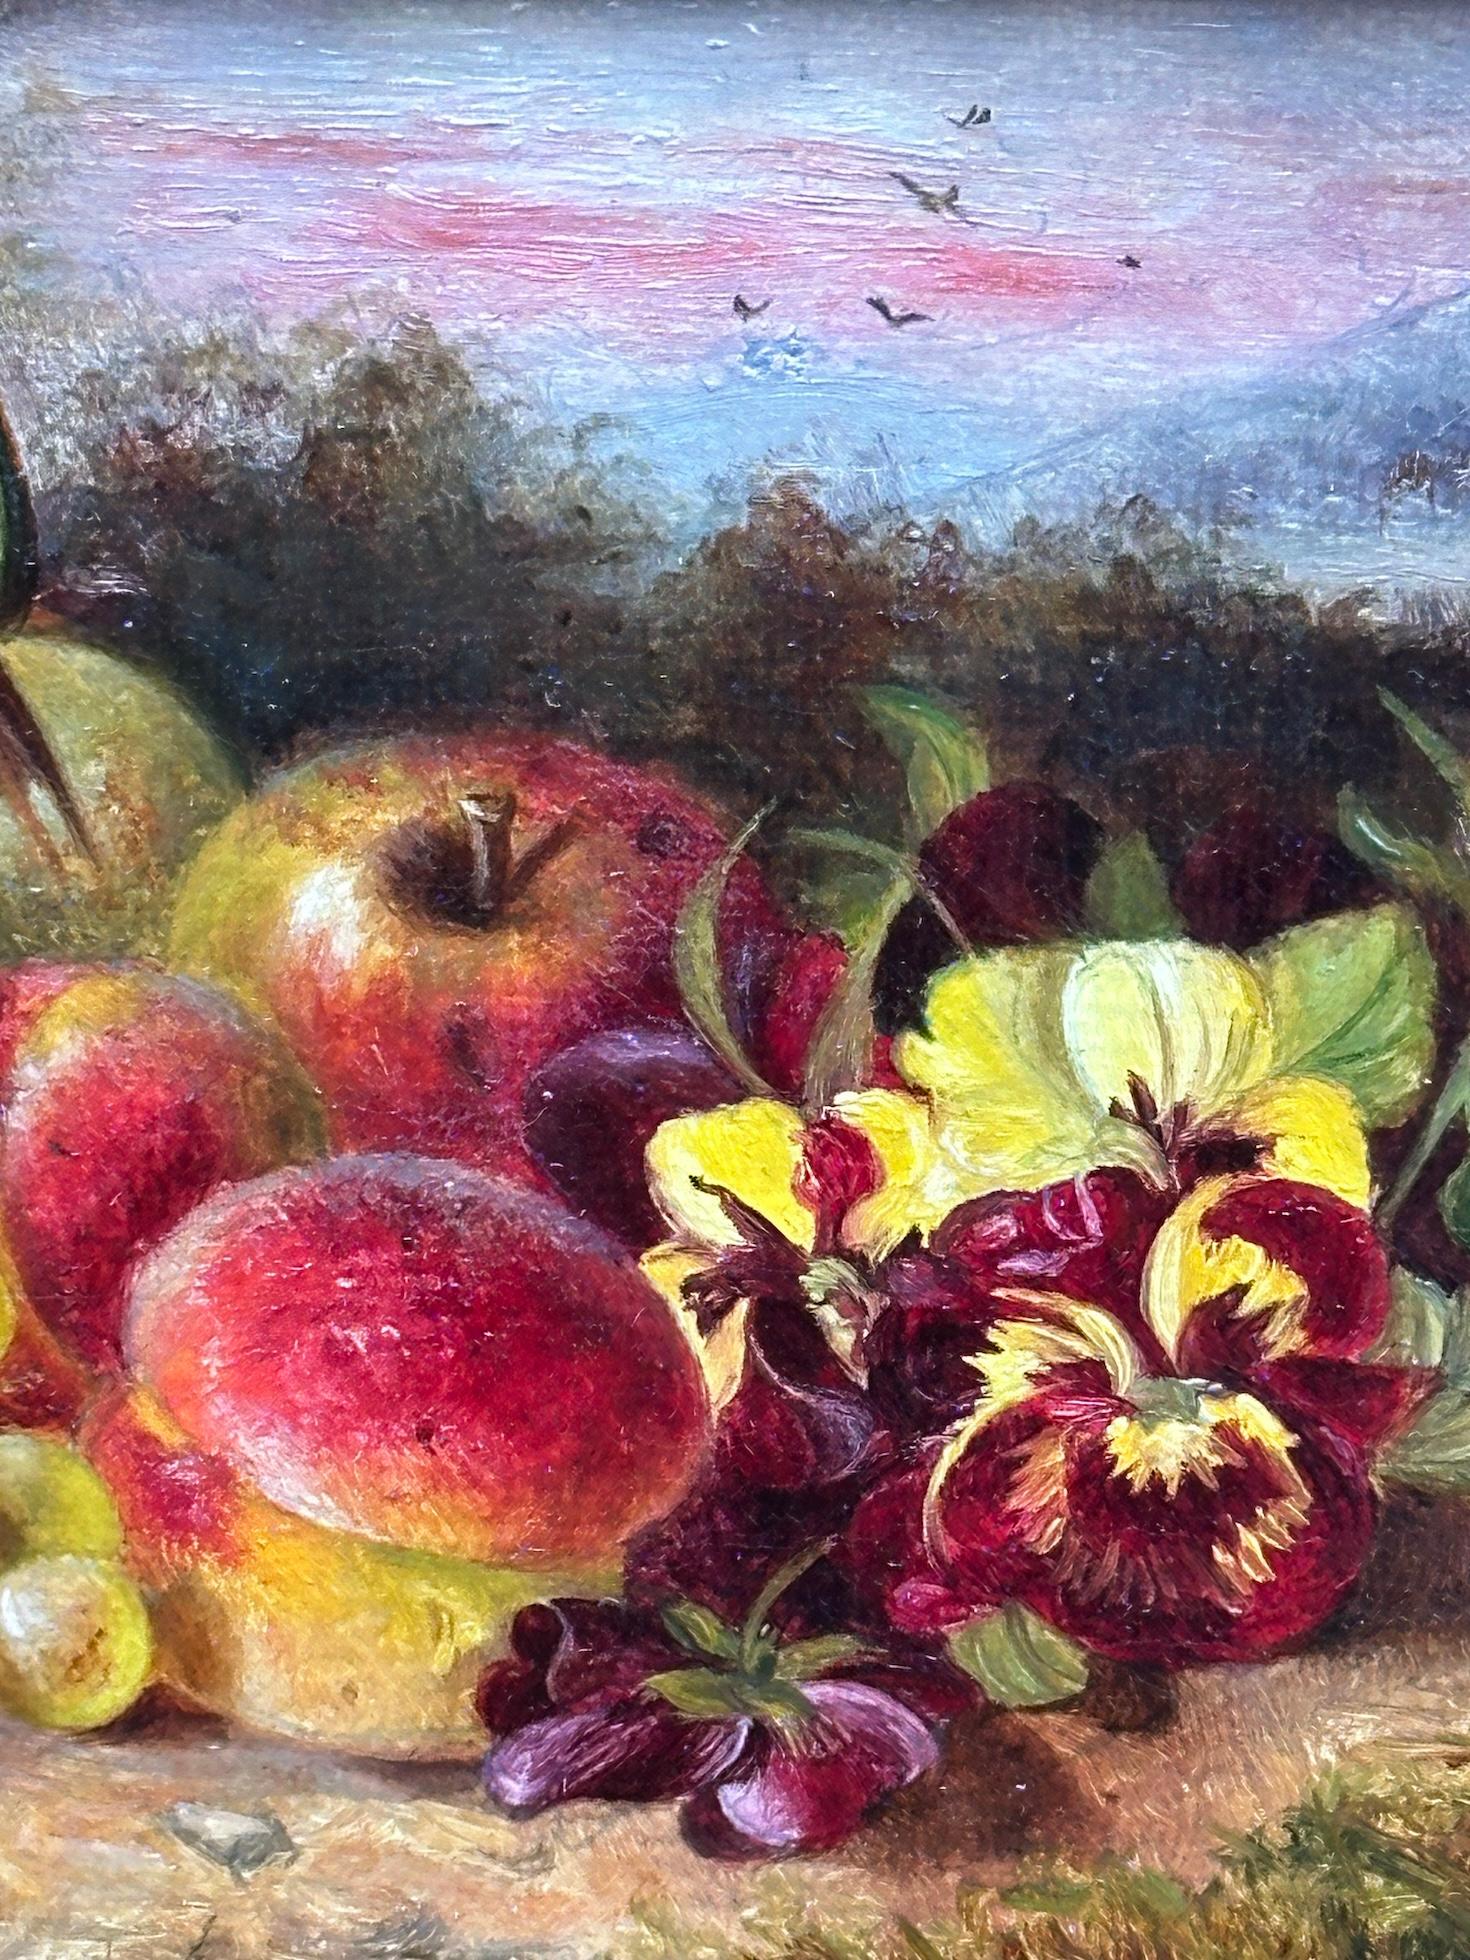 19th century English still life of fruit, apples, pears, birds nest, flowers For Sale 3